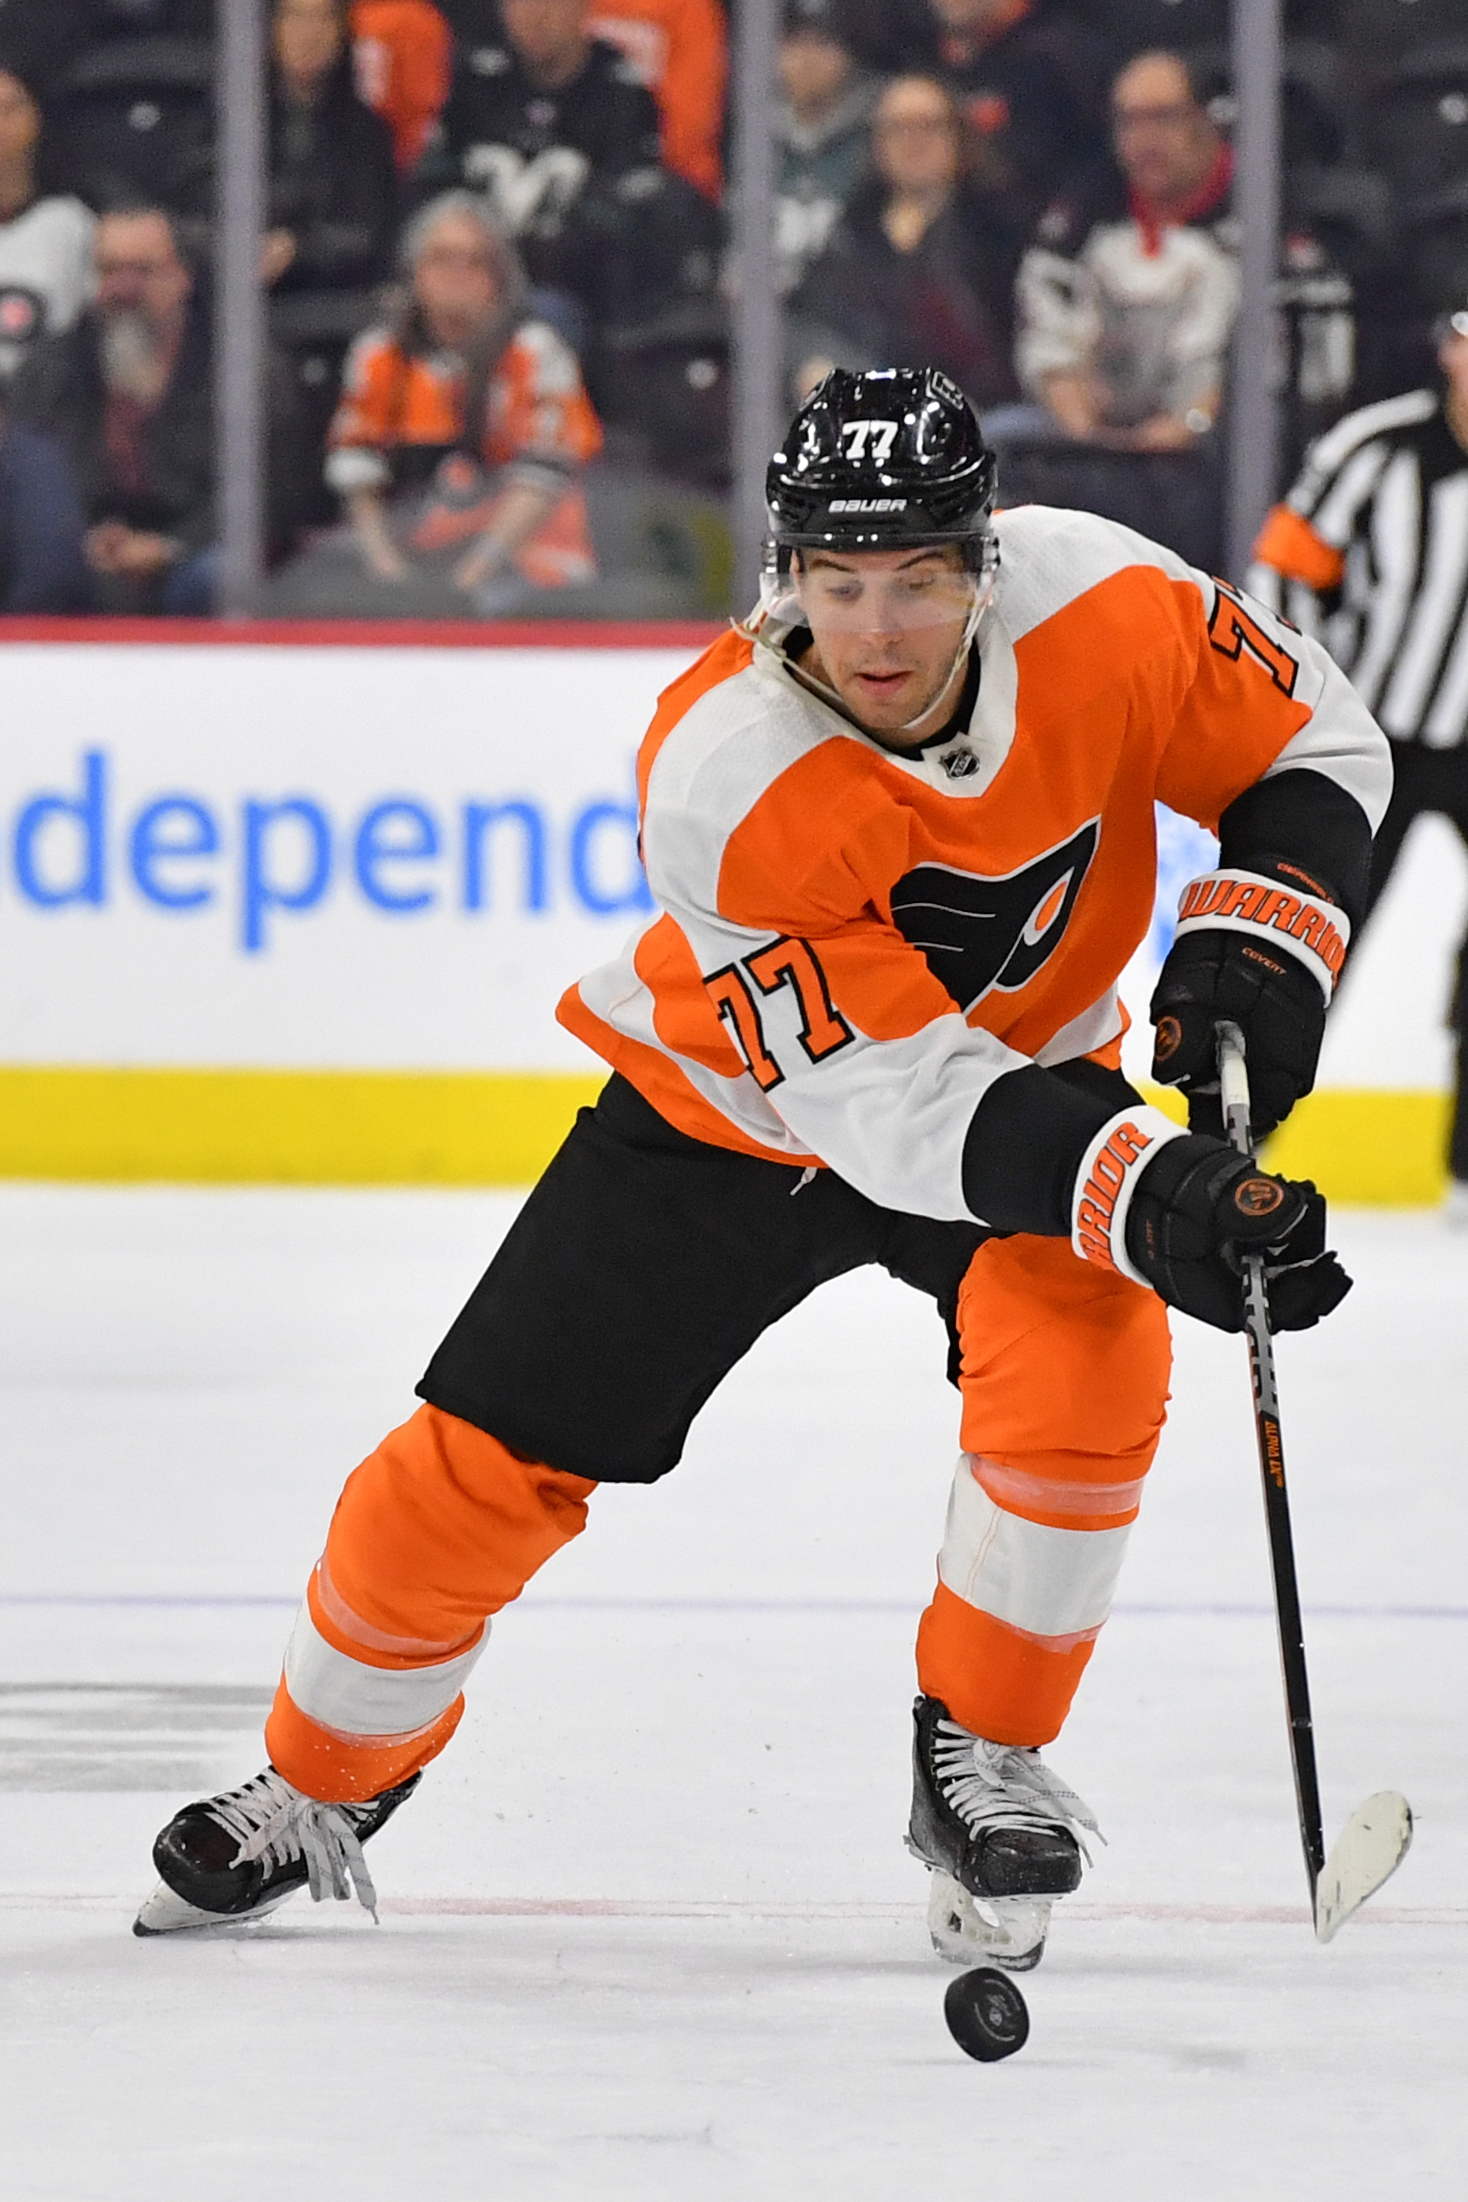 Flyers confirm Briere buyout